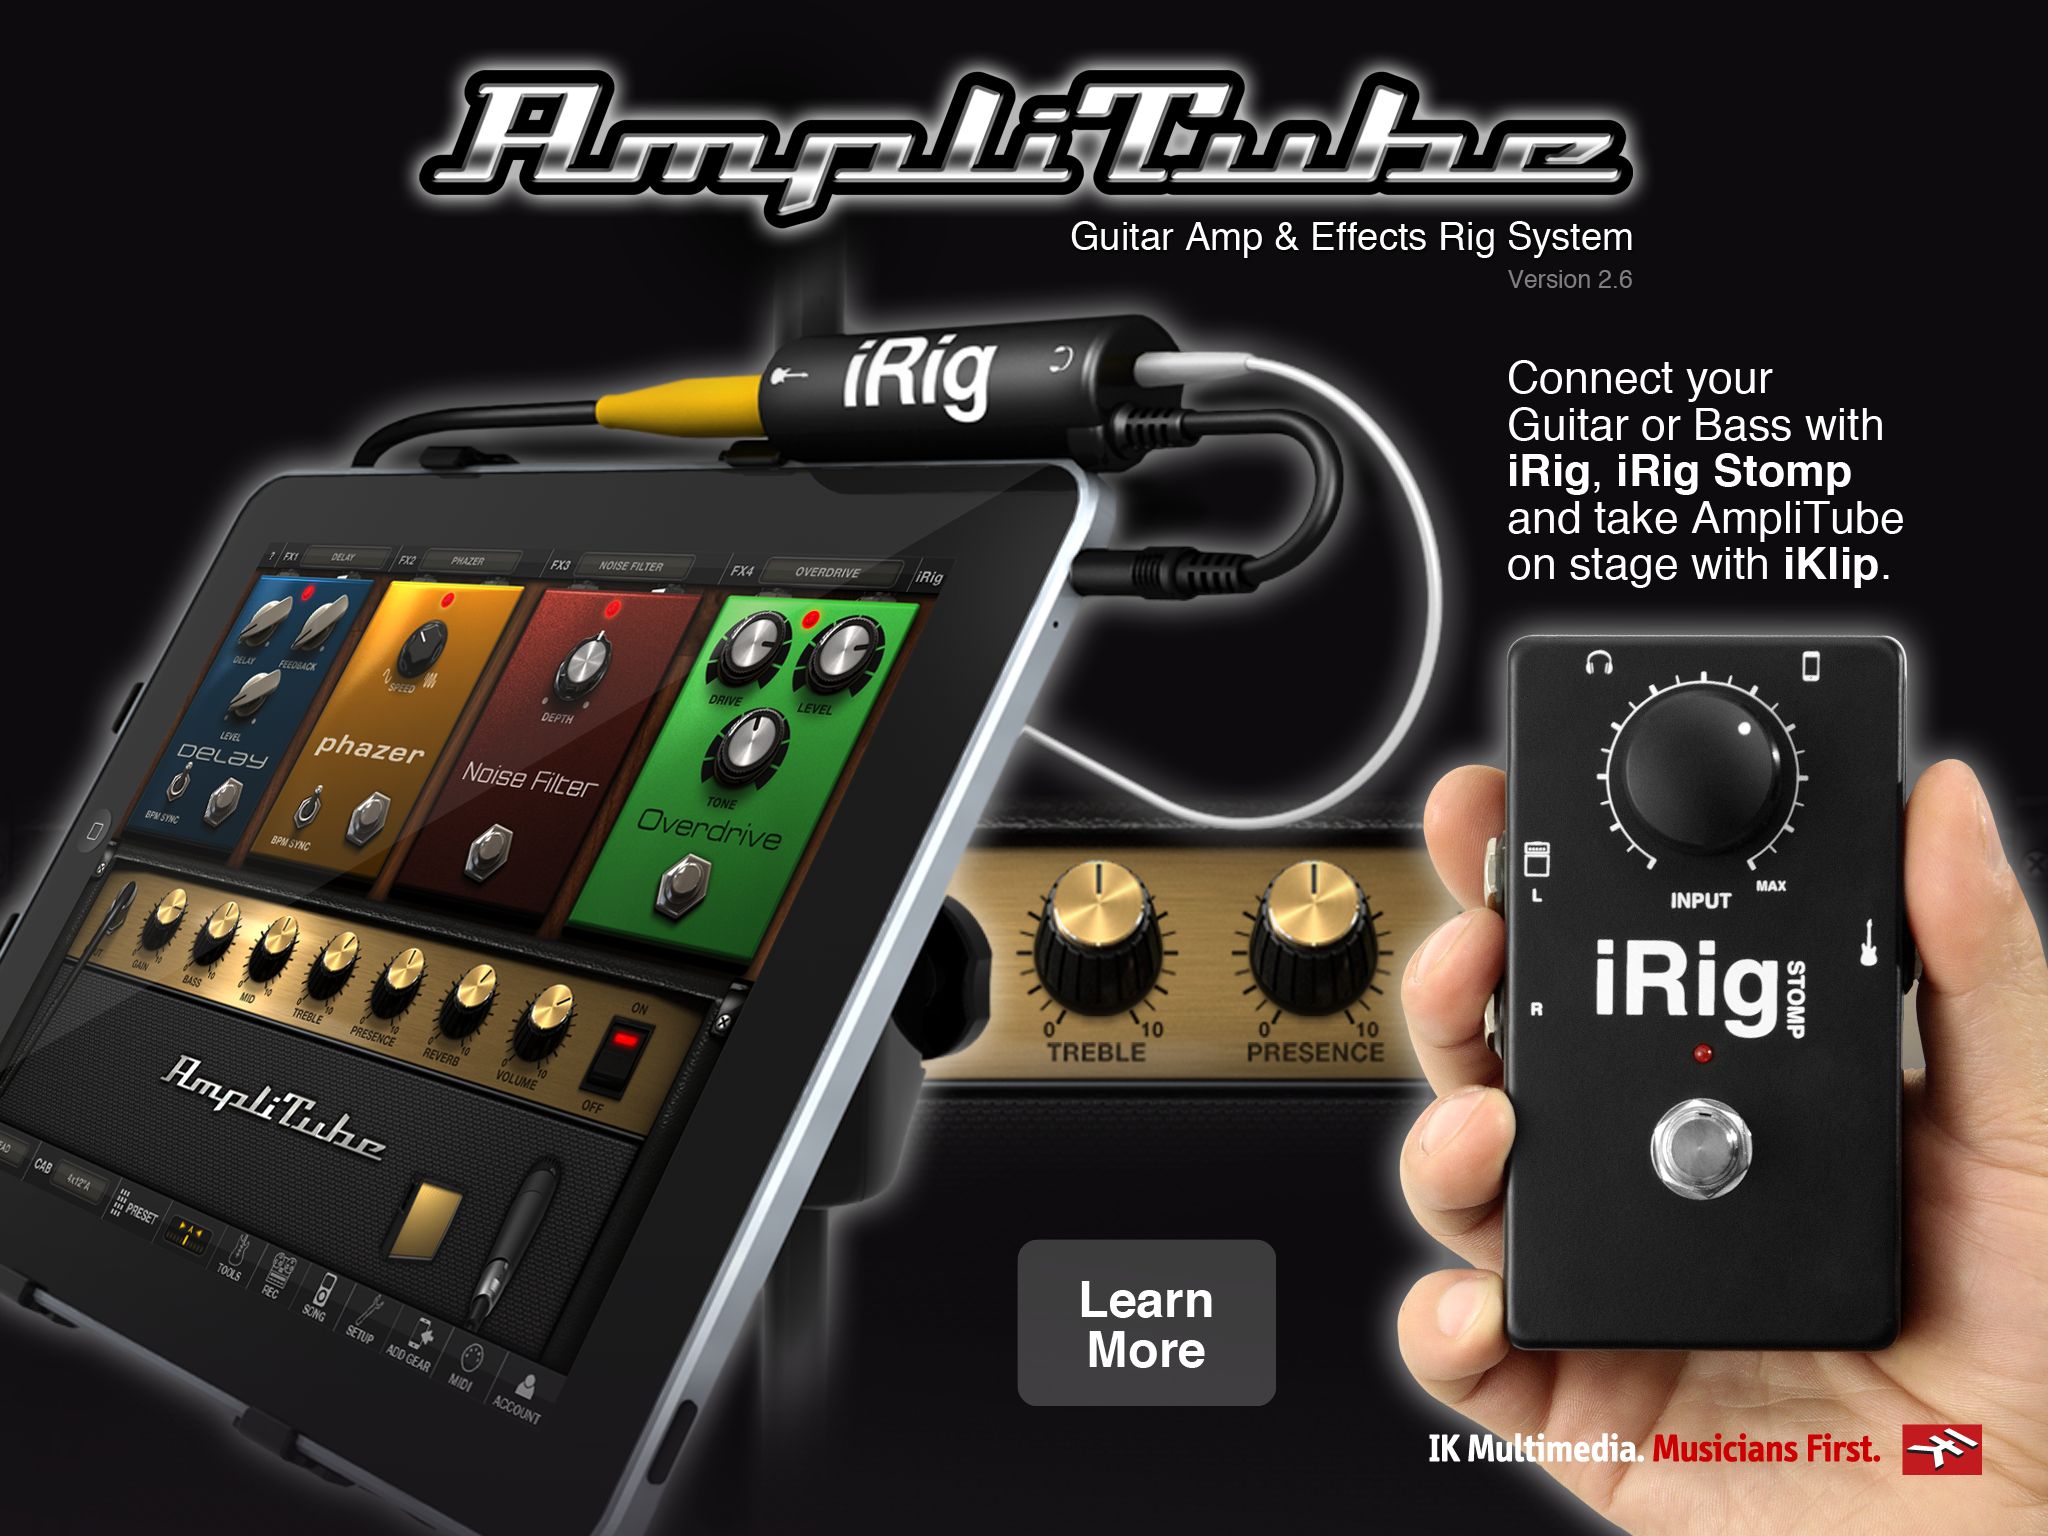 download the last version for ipod AmpliTube 5.6.0